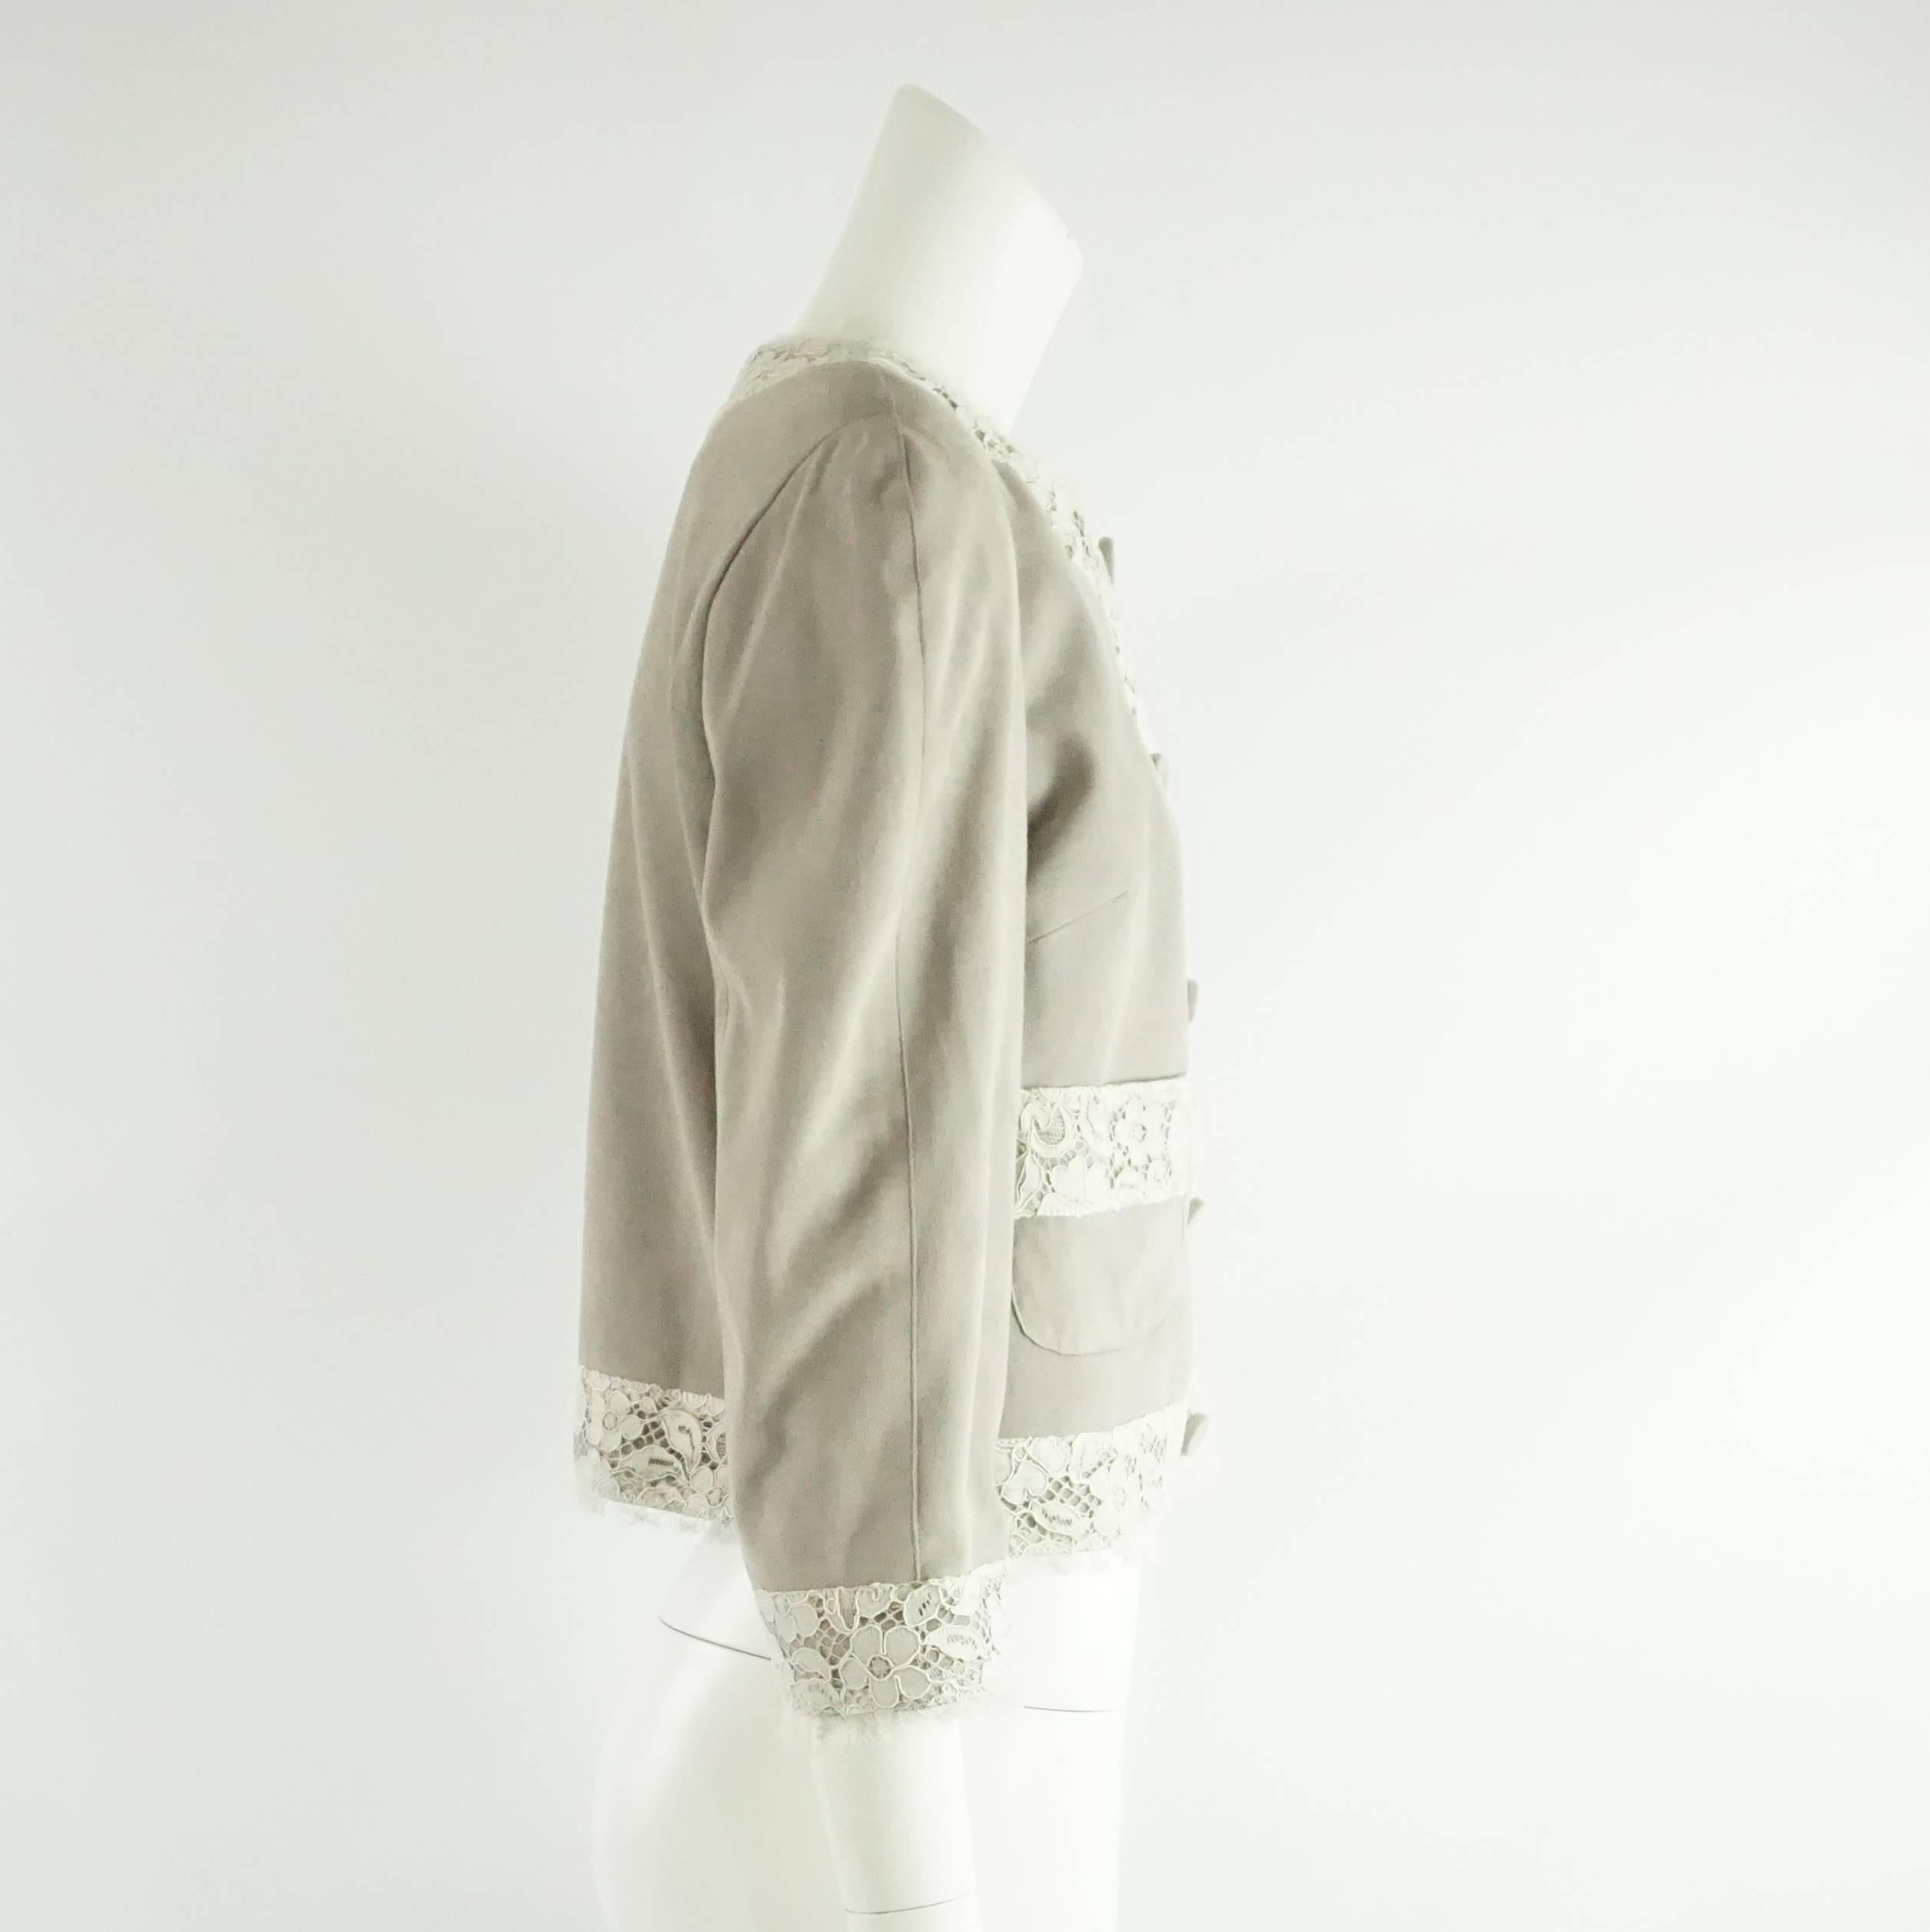 This Dolce & Gabbana jacket is gray suede and has an ivory lace trim. The jacket is lined in a Black and White Silk Polka Dot fabric and has a 3/4 sleeve. There are 2 front pockets and 5 large suede covered Snap buttons. This jacket is in very good